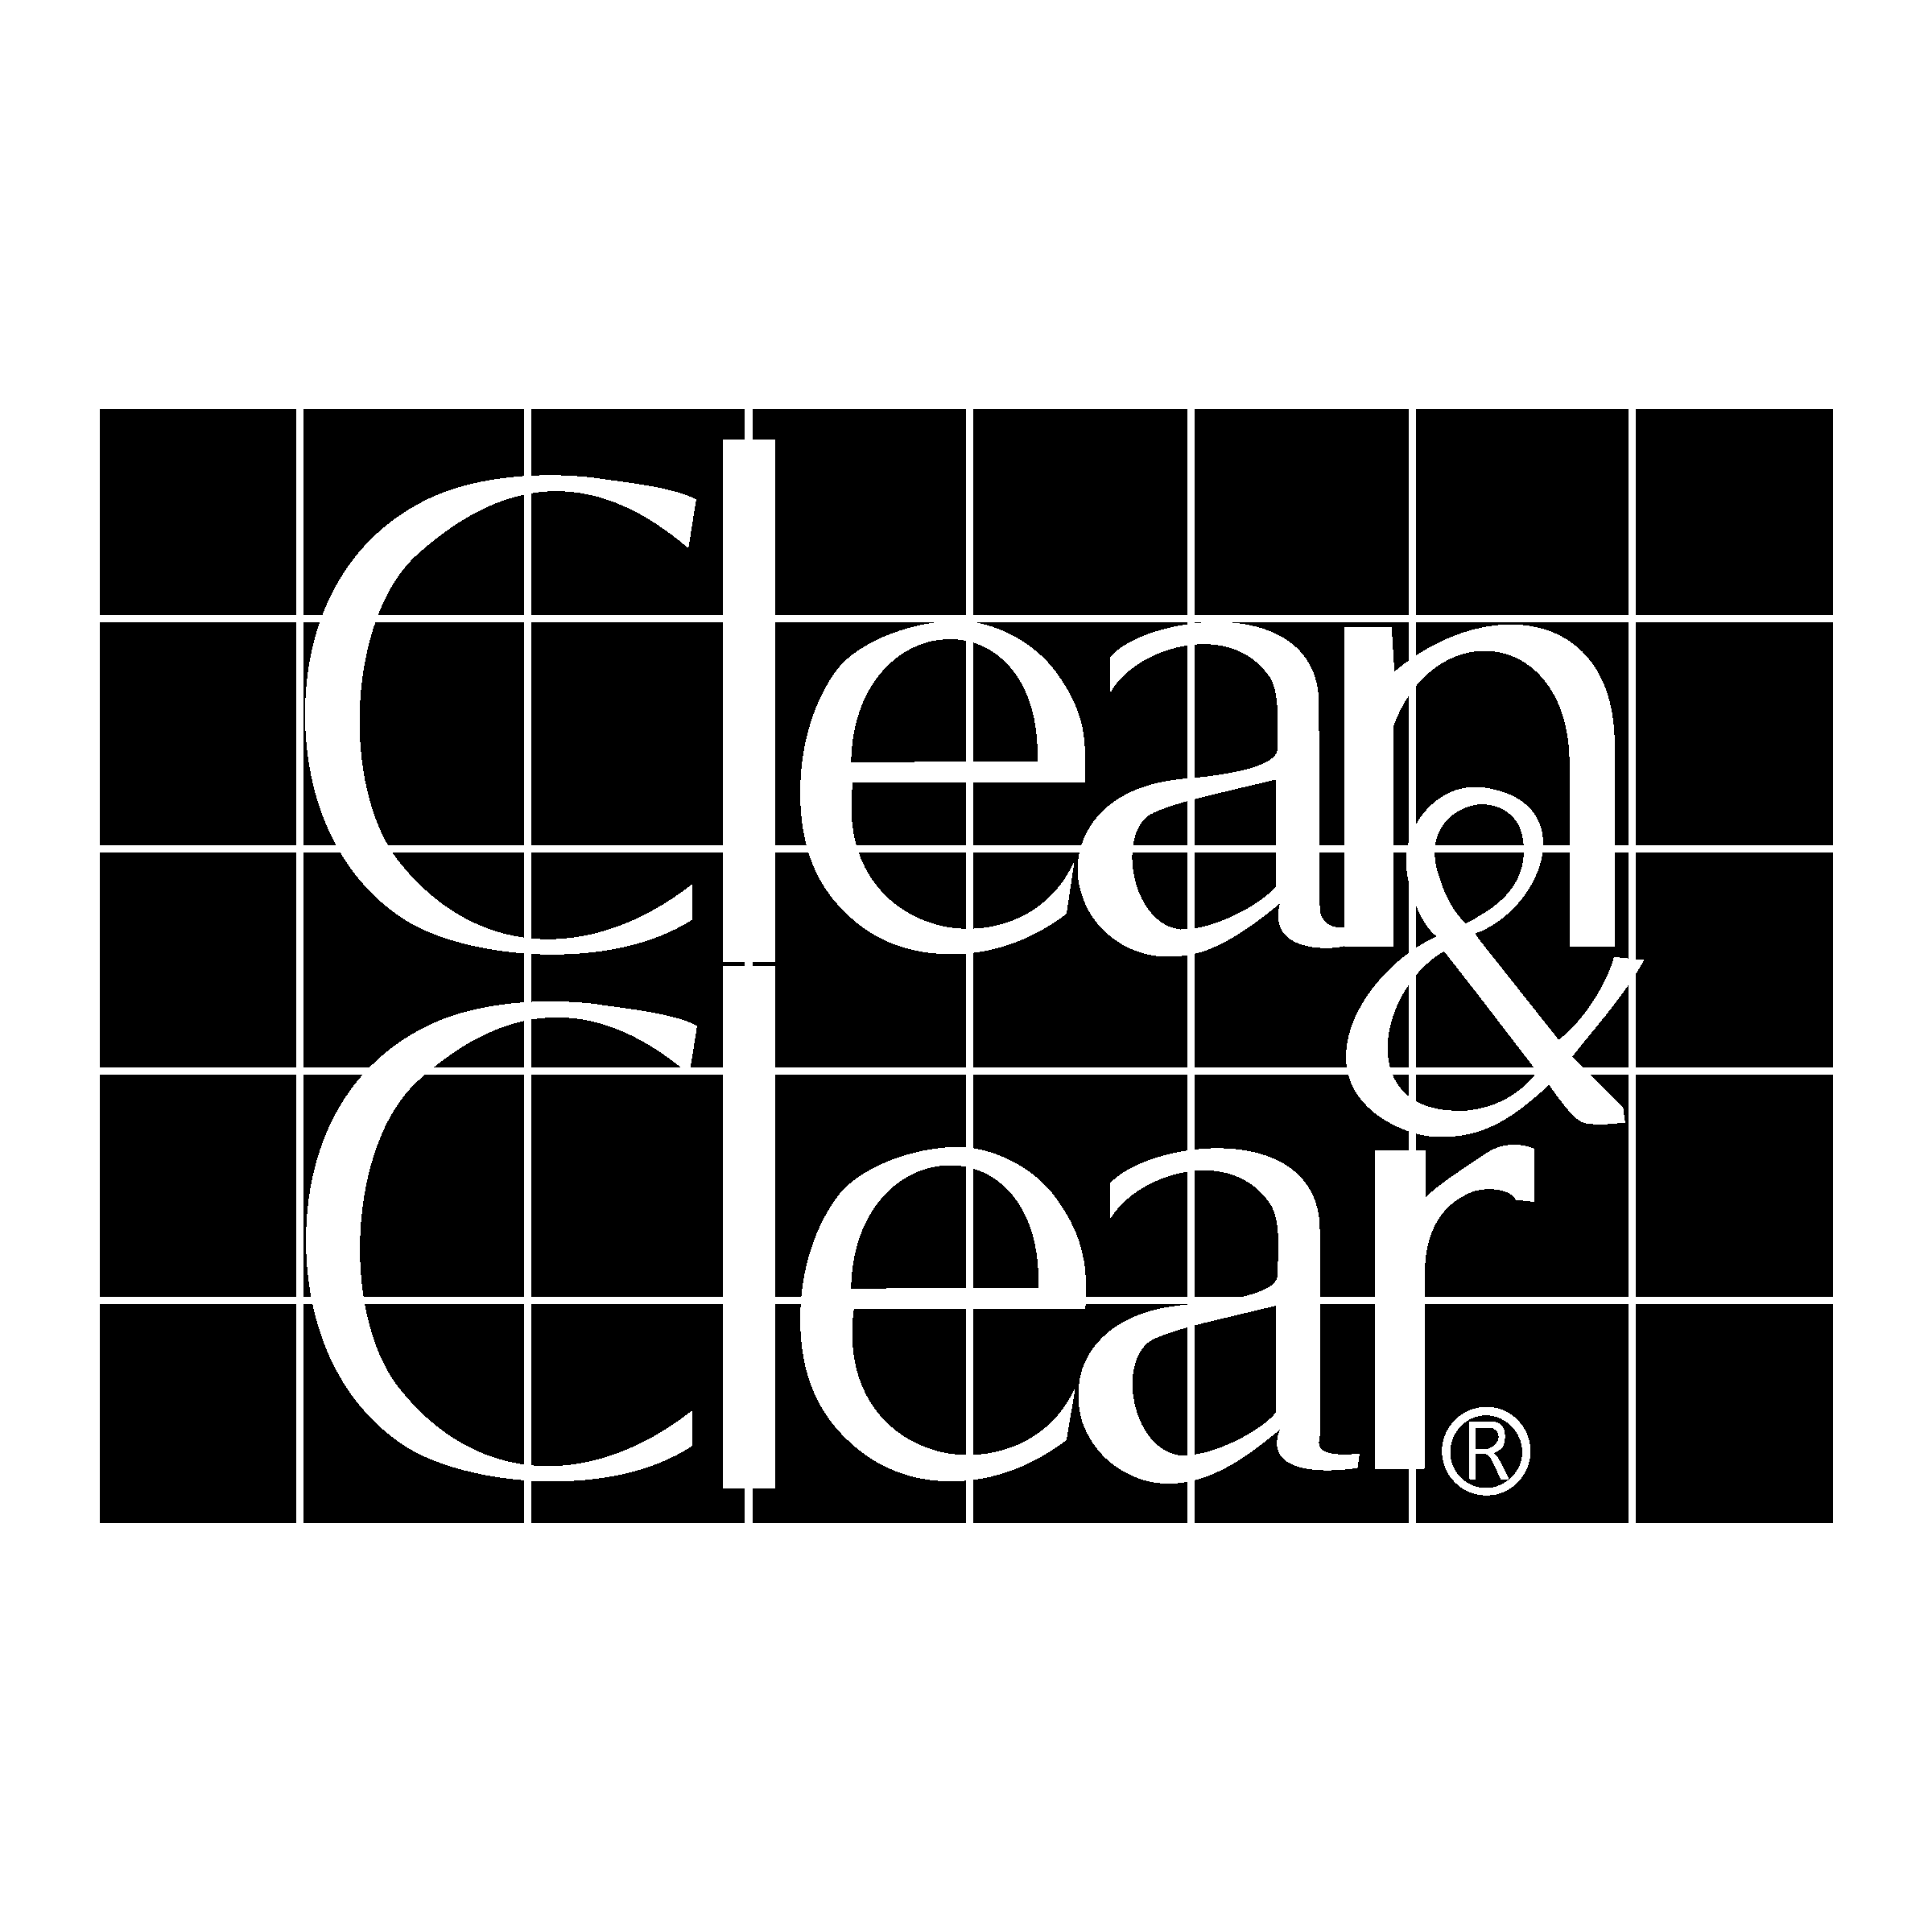 Clean and Clear Logo - Clean & Clear Logo PNG Transparent & SVG Vector